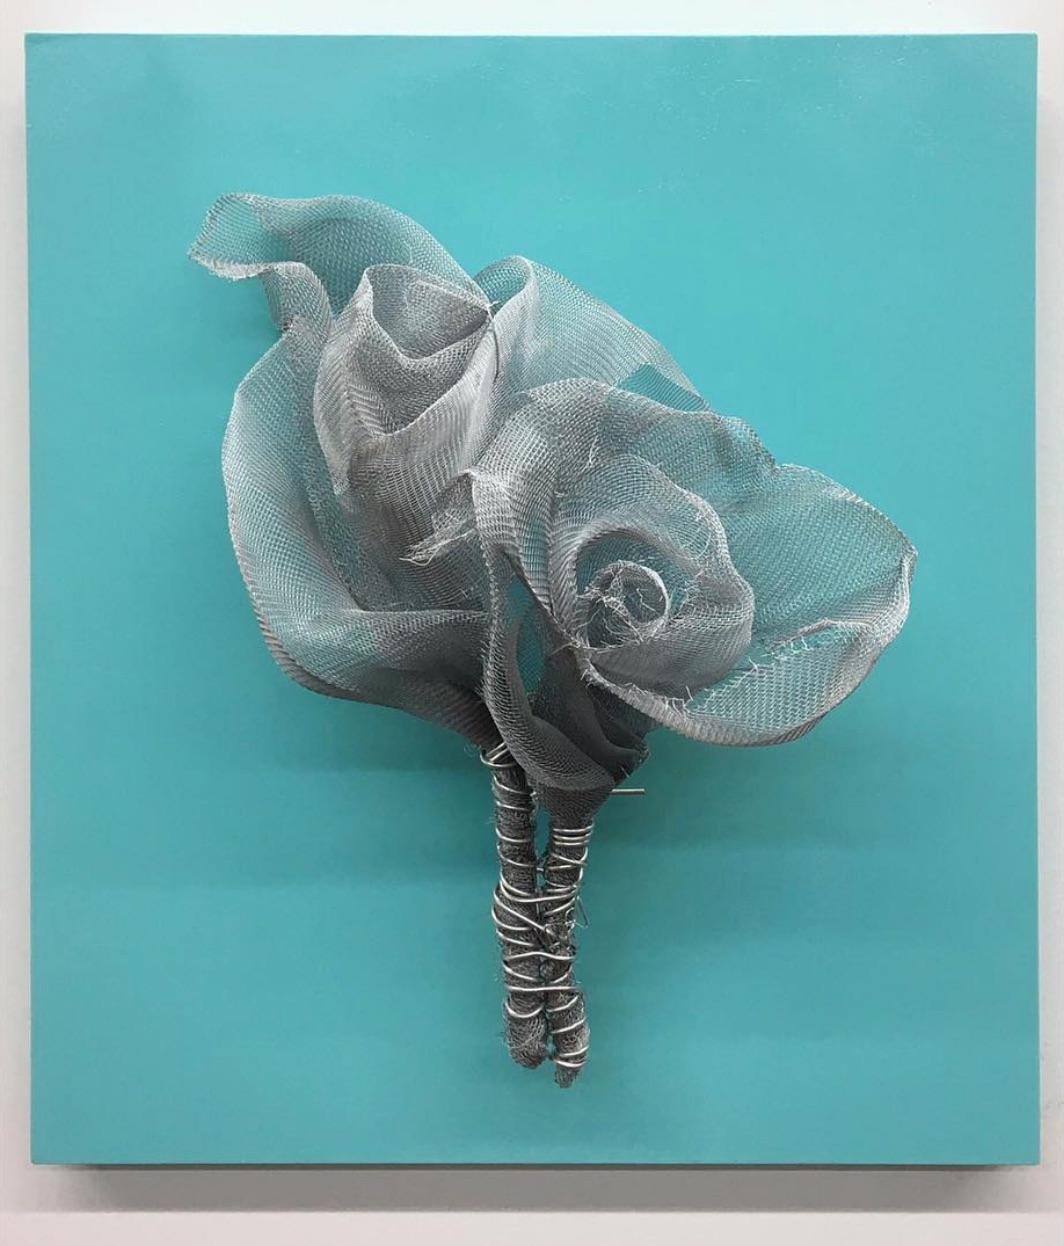 ROSES DELICIOUS sculpture by Melanie Newcombe
Aluminum window screen, aluminum wire, wood, paint 
19" x 17" x 7" inch
2018

* * * Melanie Newcombe * * *
* * Artist Statement * *
I am perpetually pushing materials toward innovative structures, with